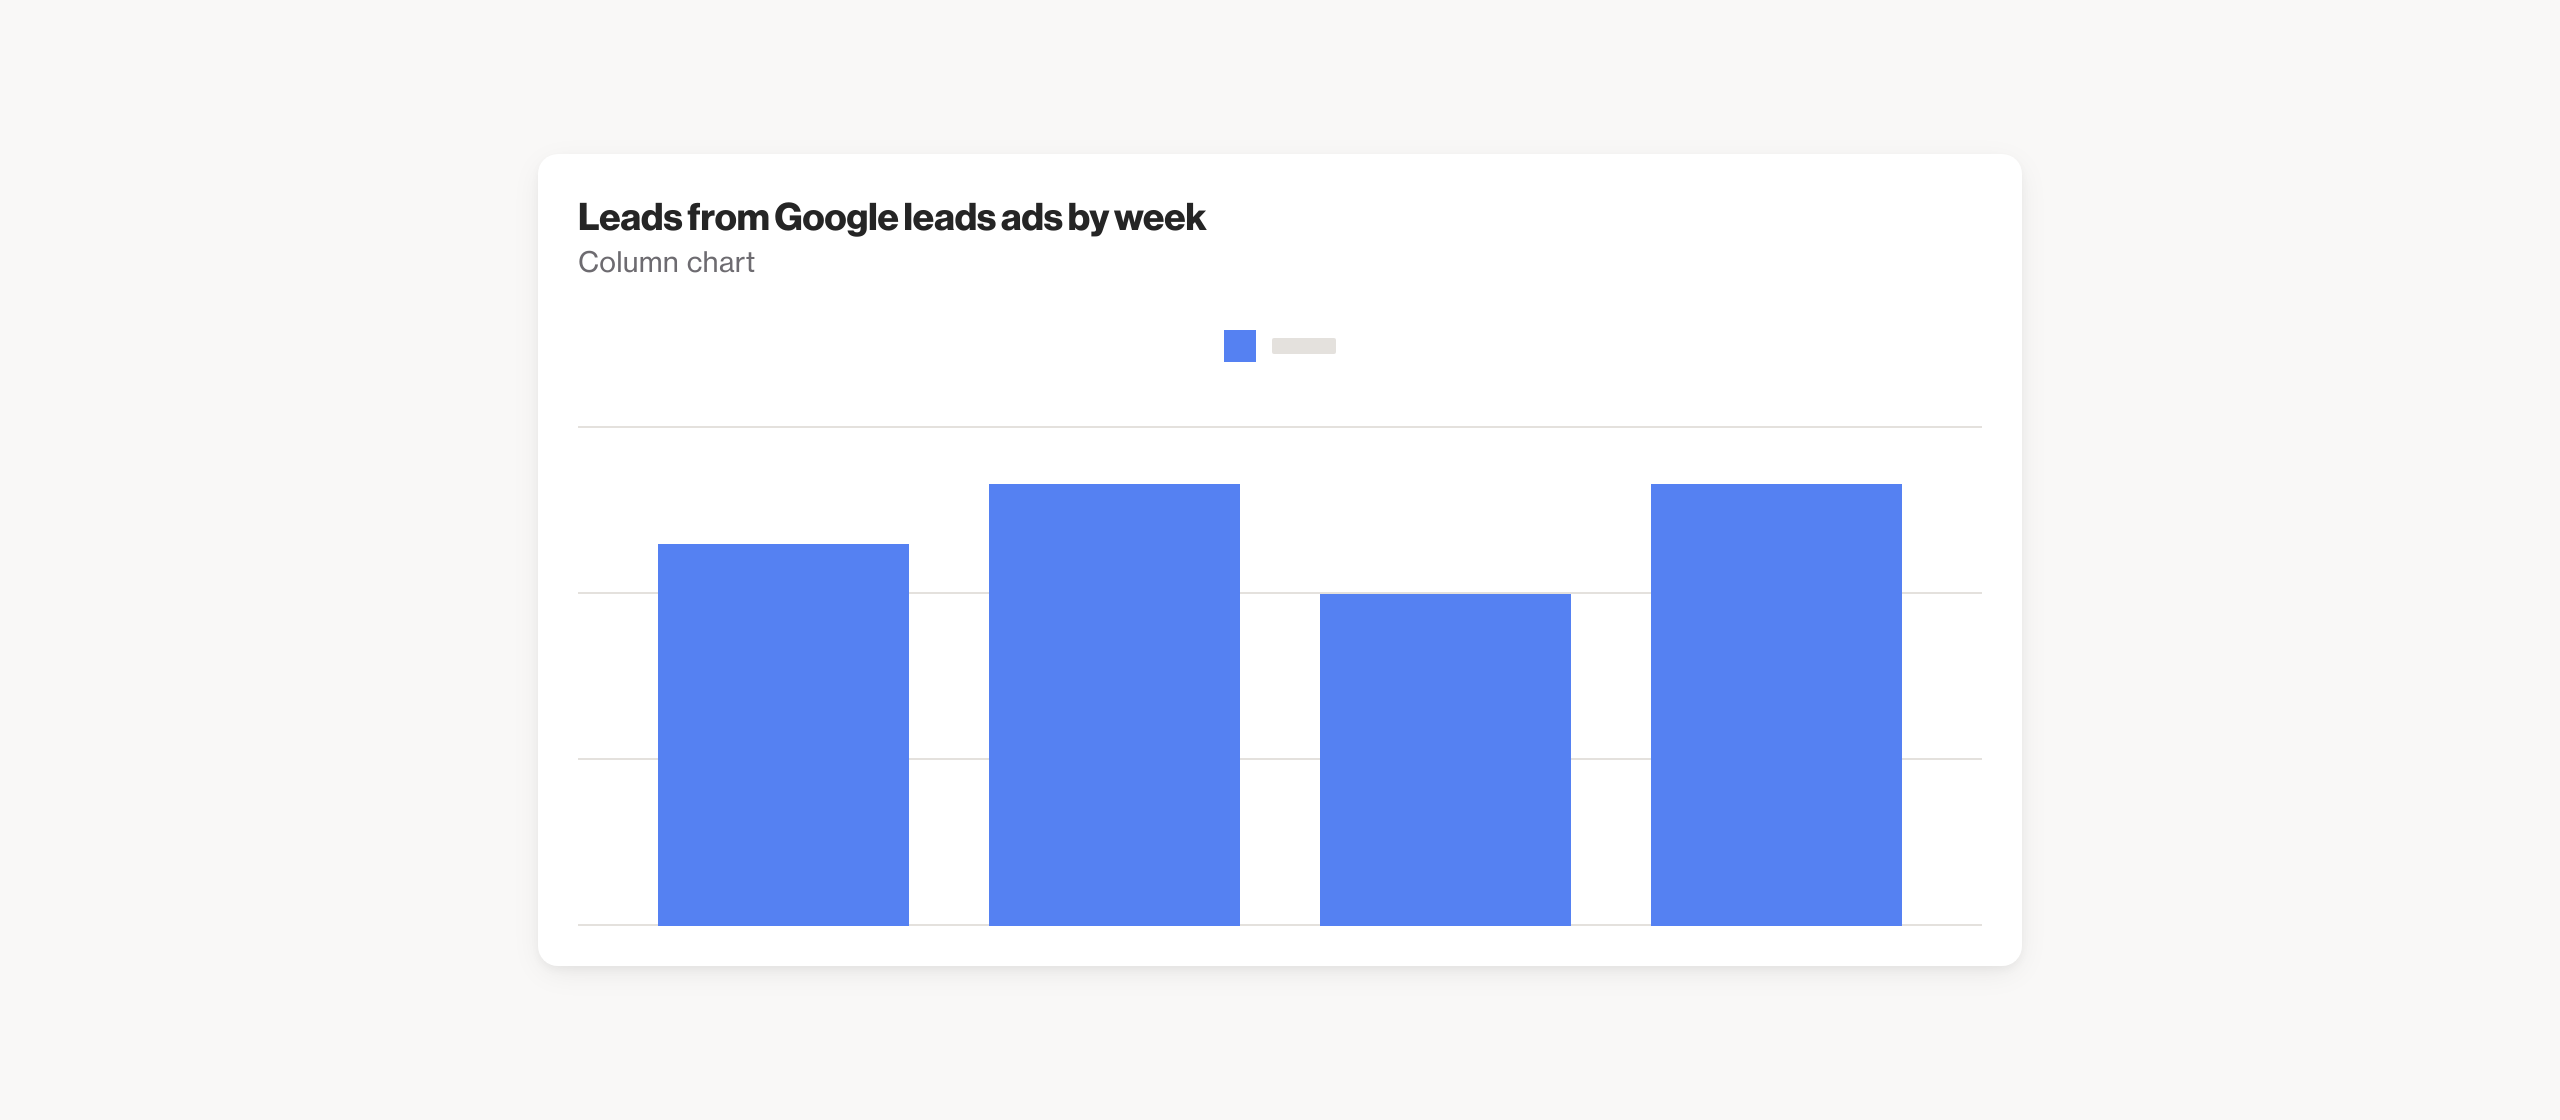 Leads from Google lead ads by week